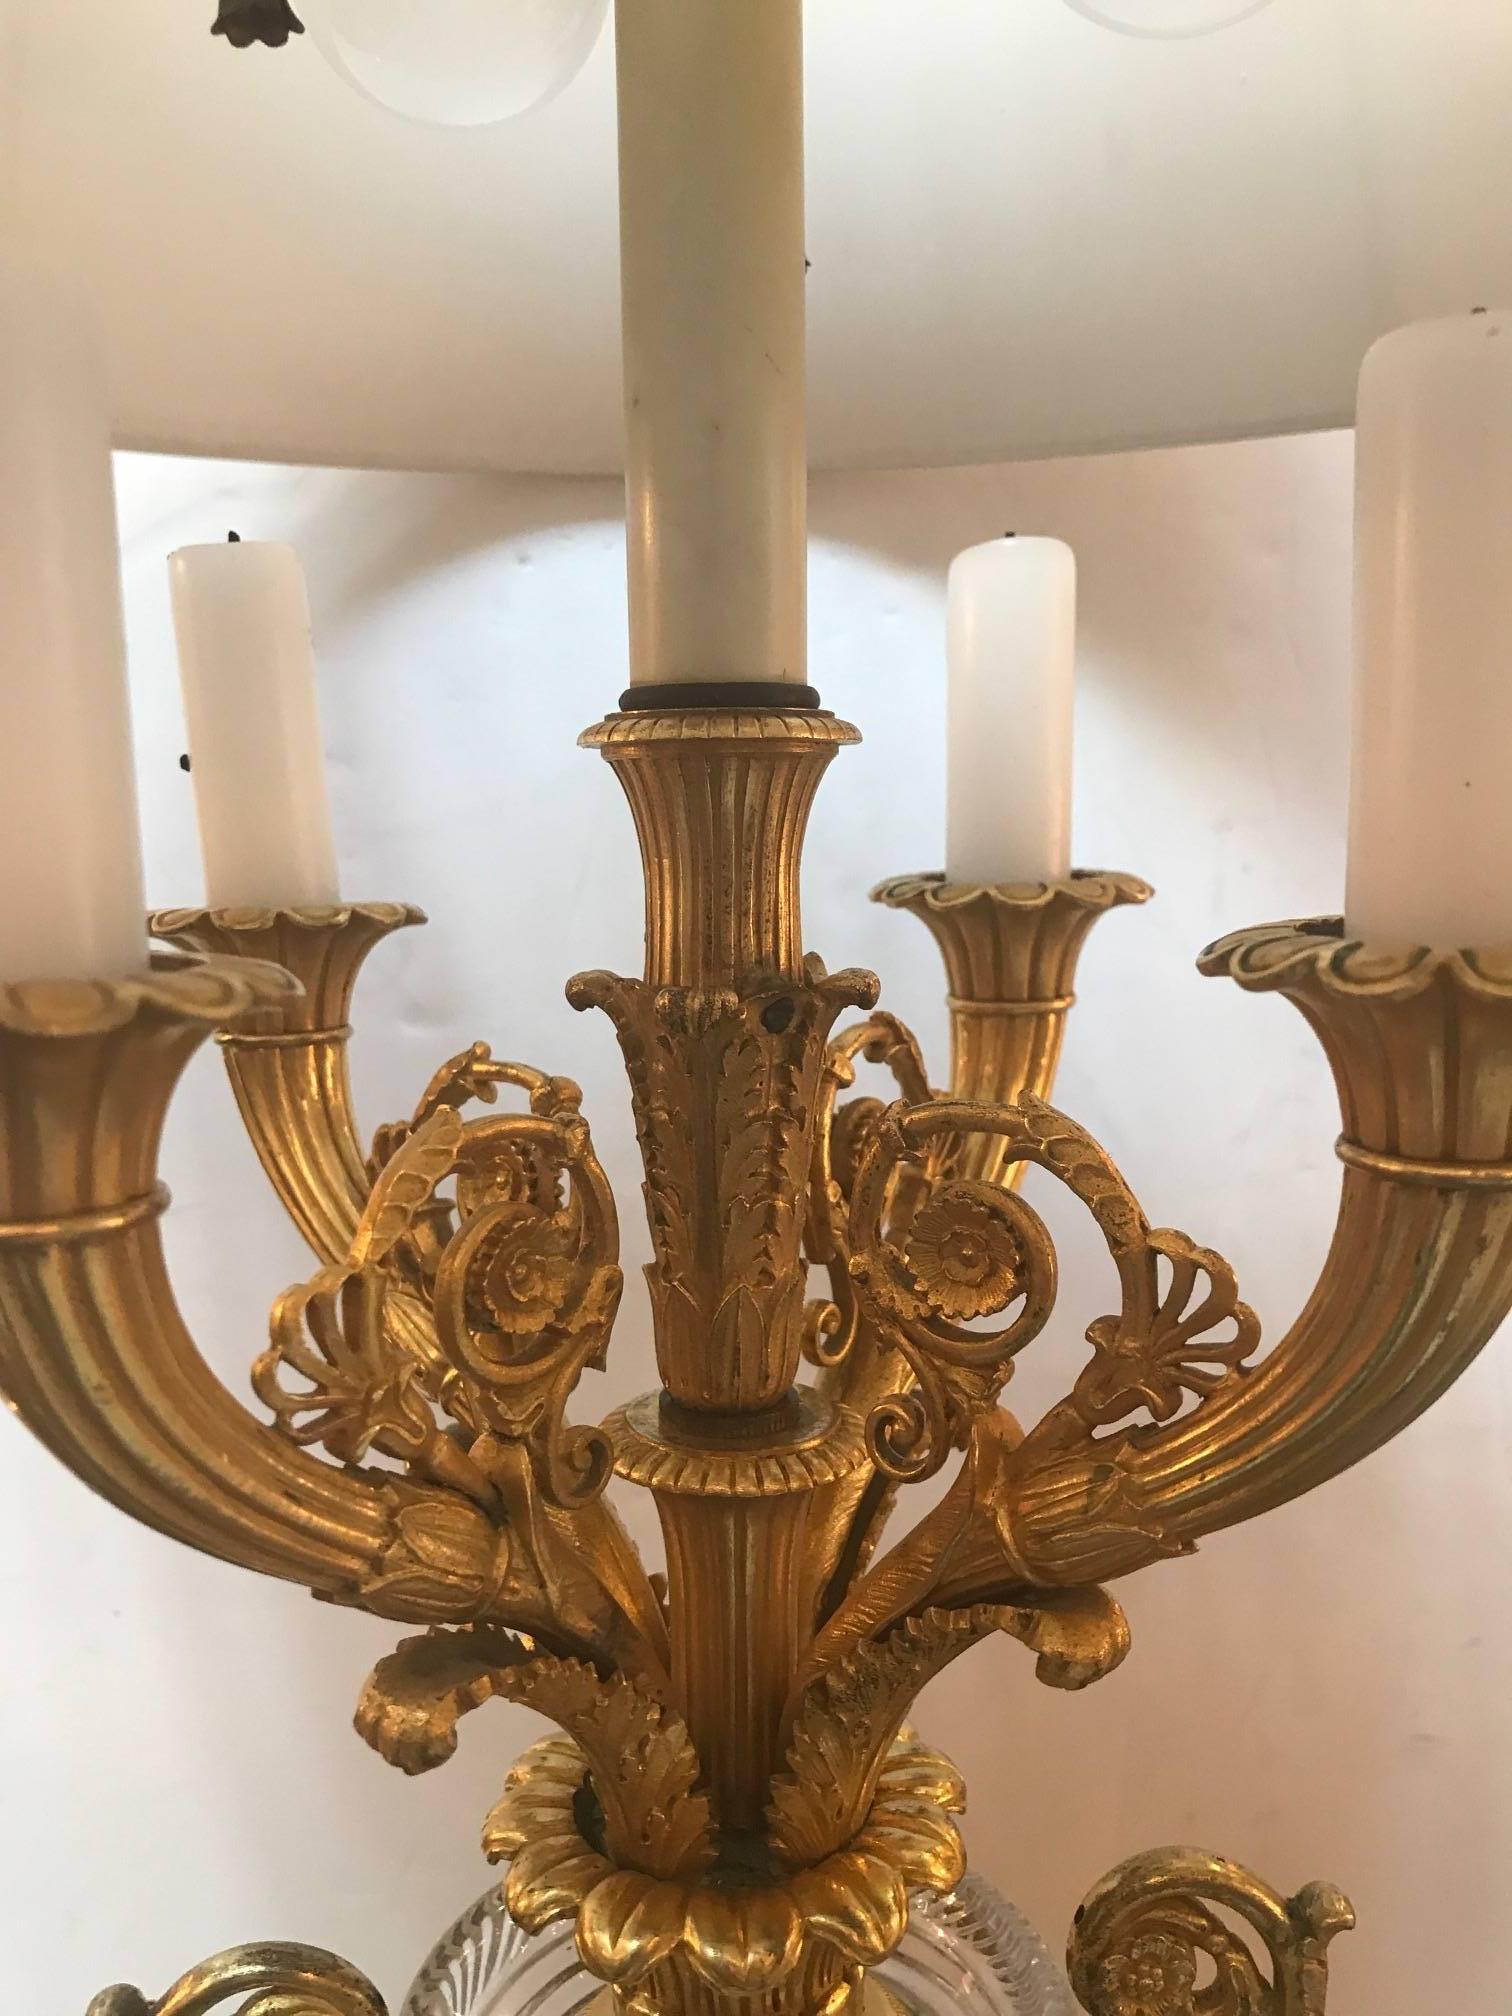 French Early 19th Century Candelabra Lamp Attributed to Baccarat